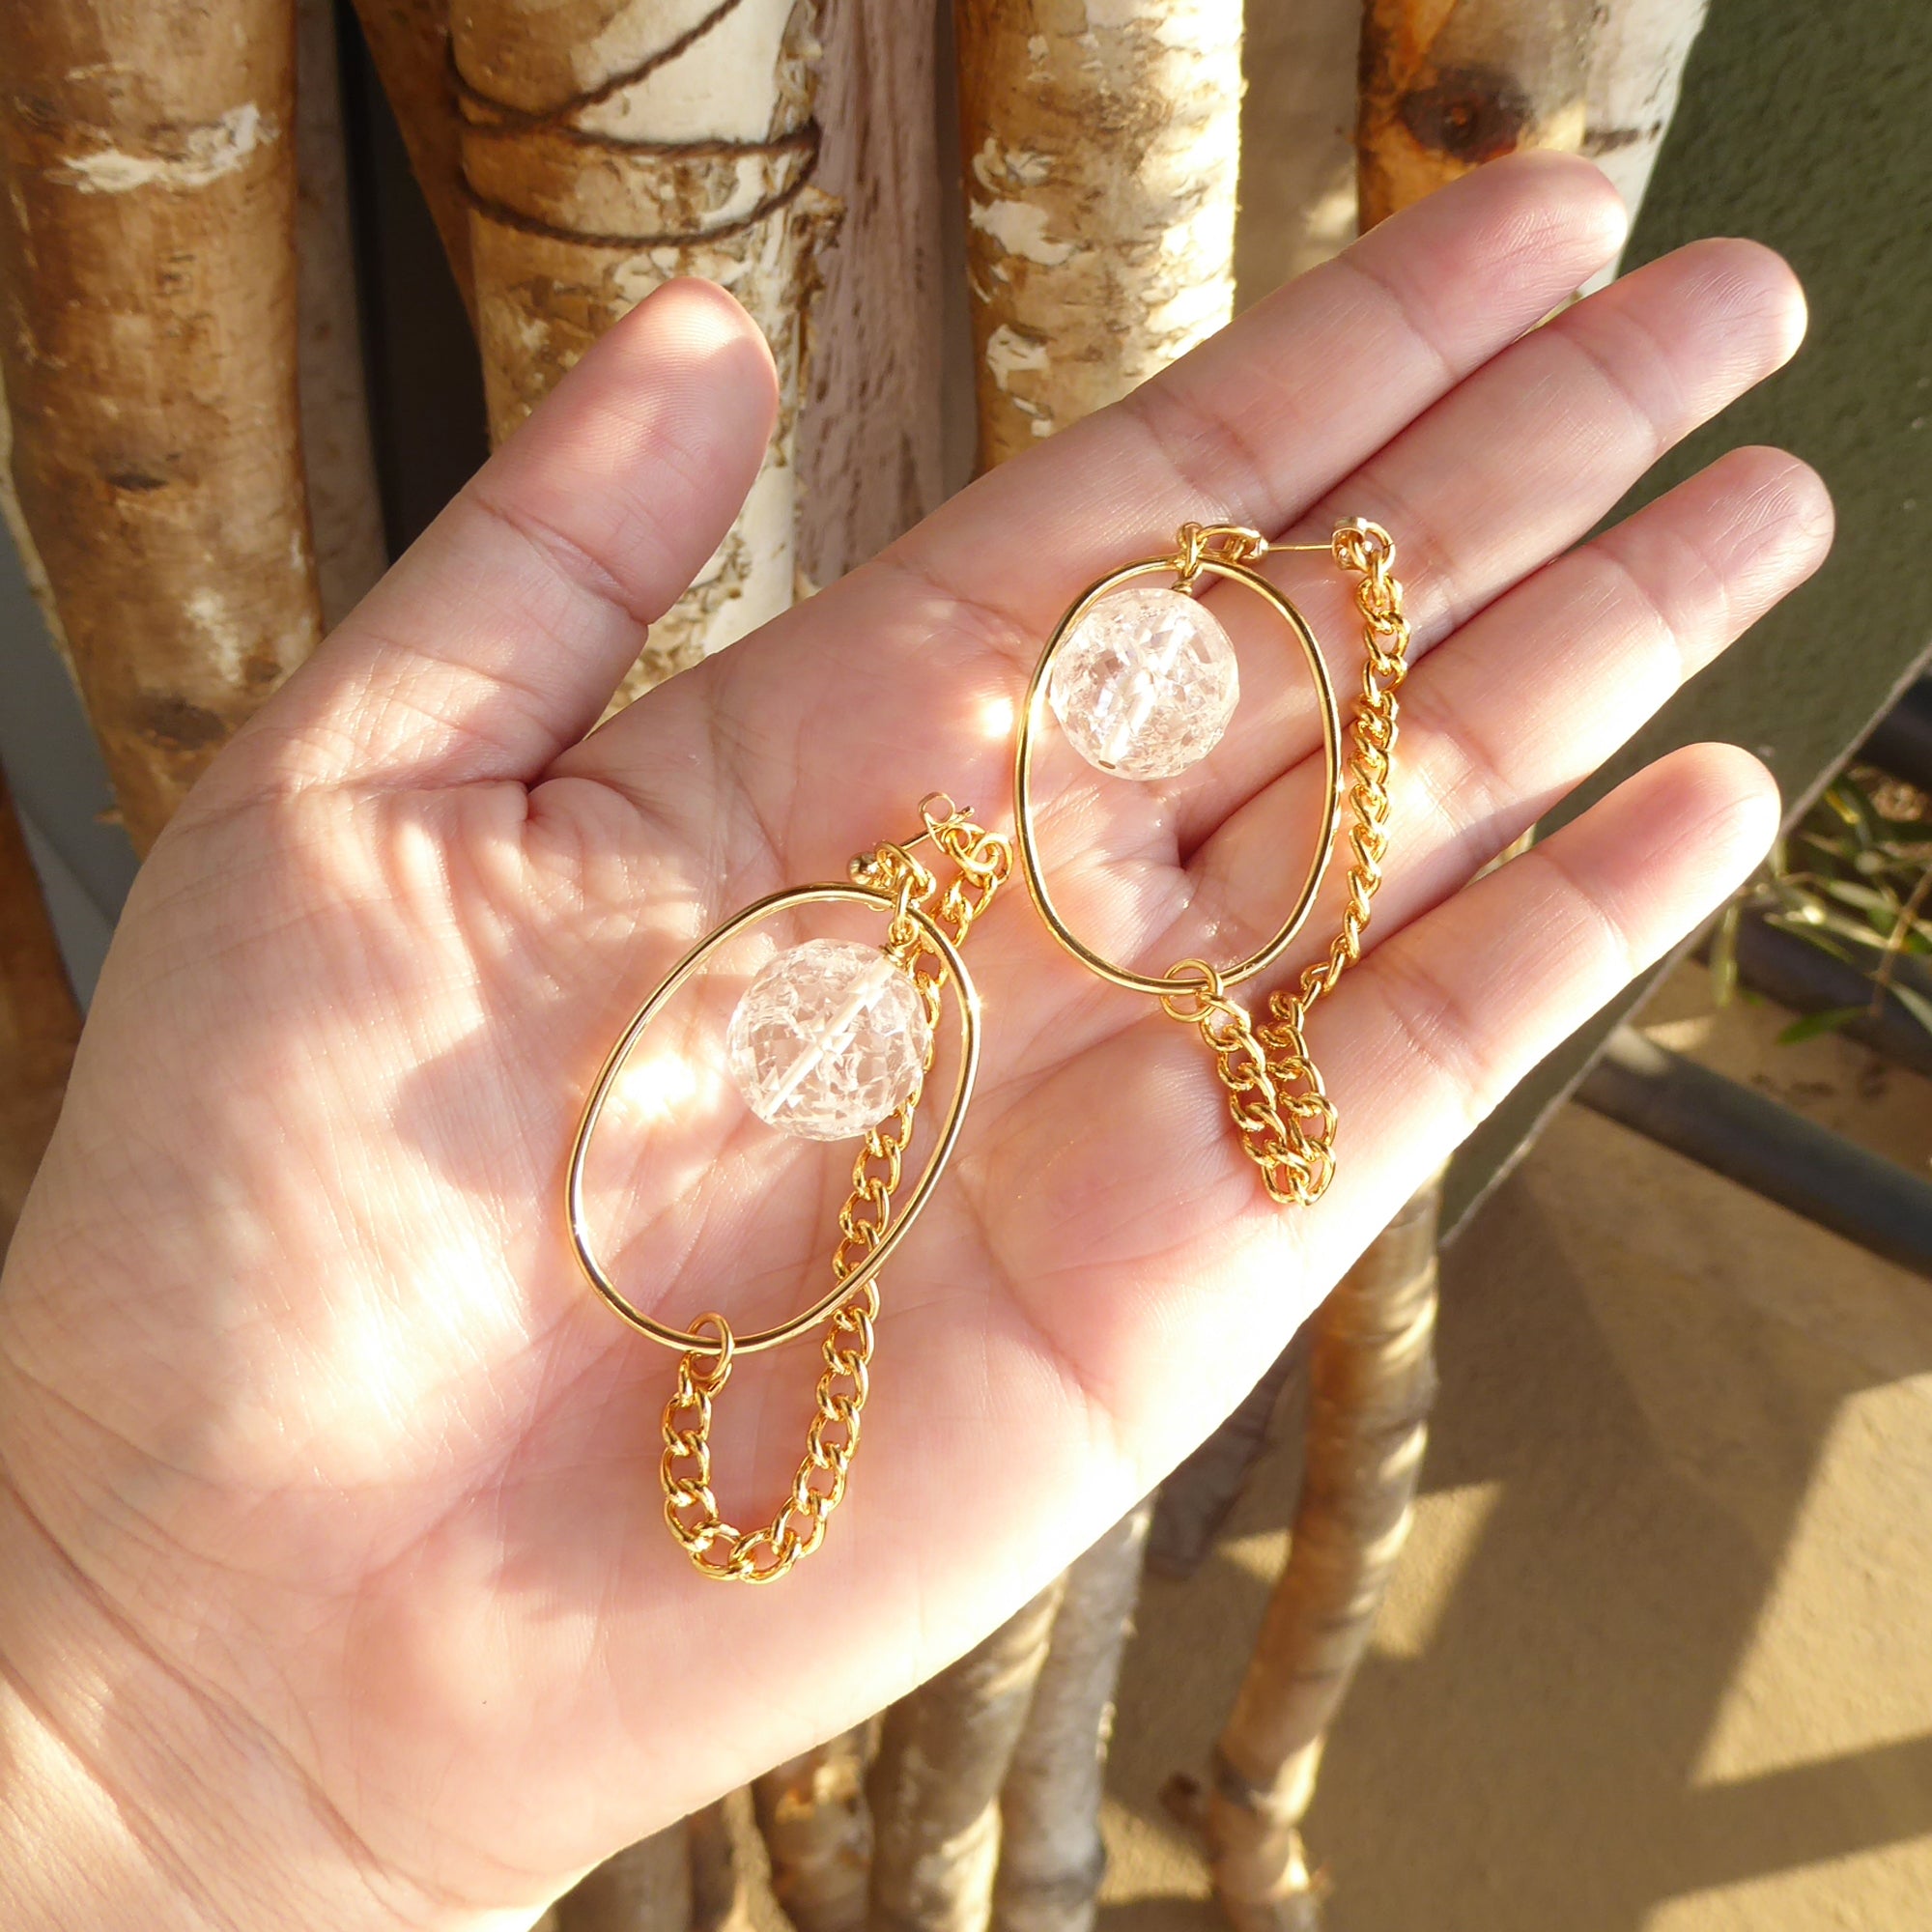 Gold saturn earrings in cracked quartz by Jenny Dayco 6